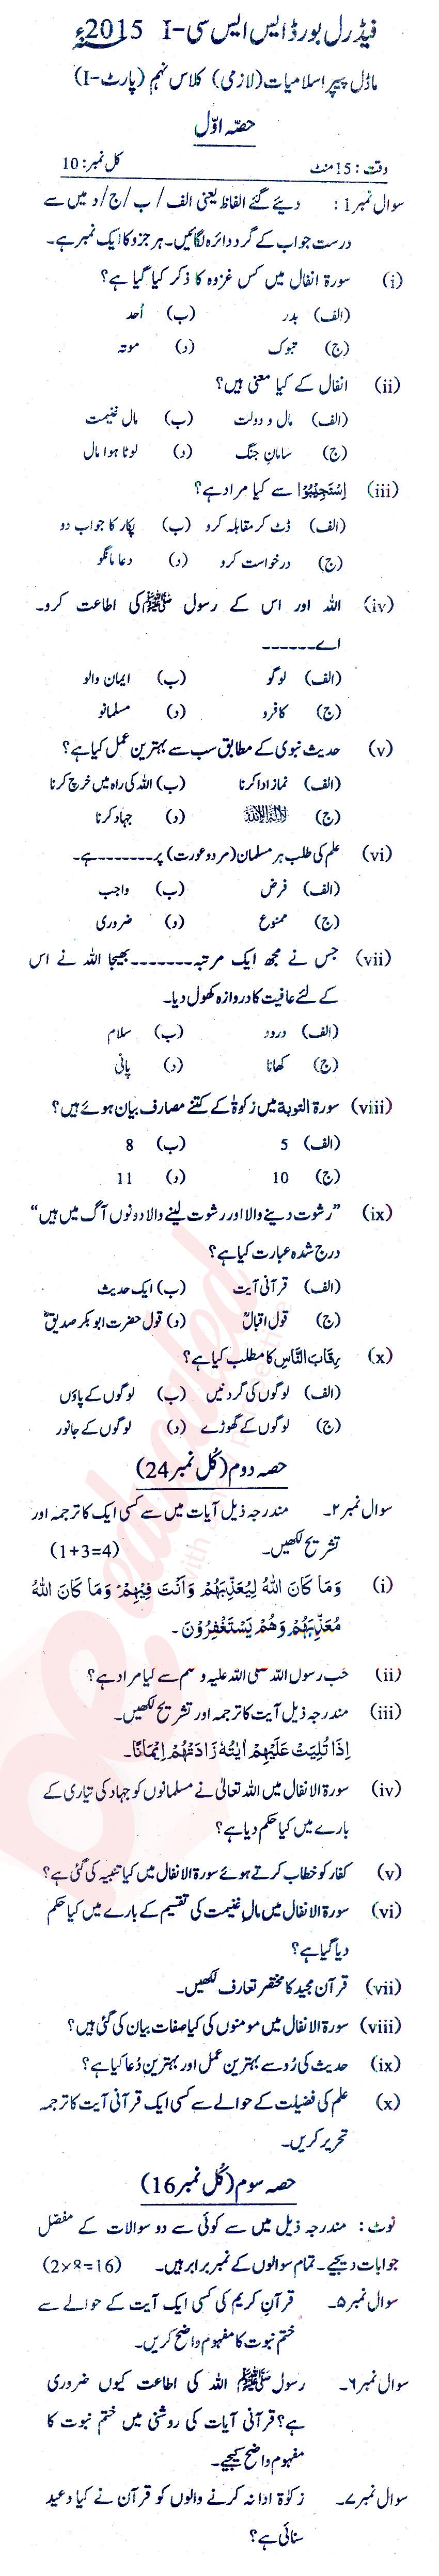 Islamiat (Compulsory) 9th class Past Paper Group 1 Federal BISE  2015